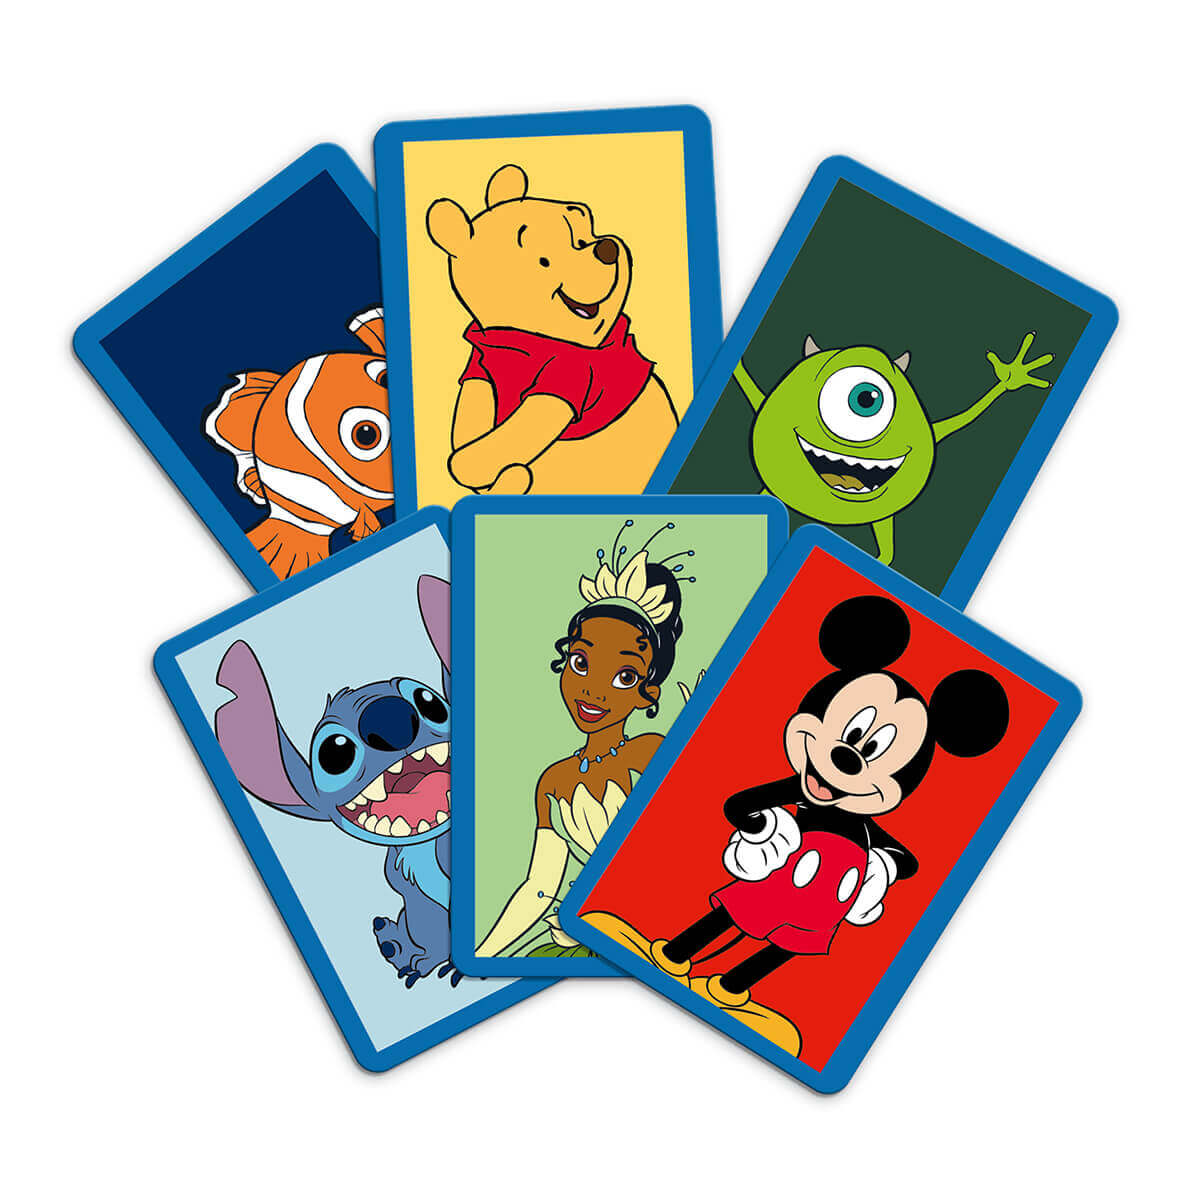 Disney Classic Movies Top Trumps Match - The Crazy Cube Game